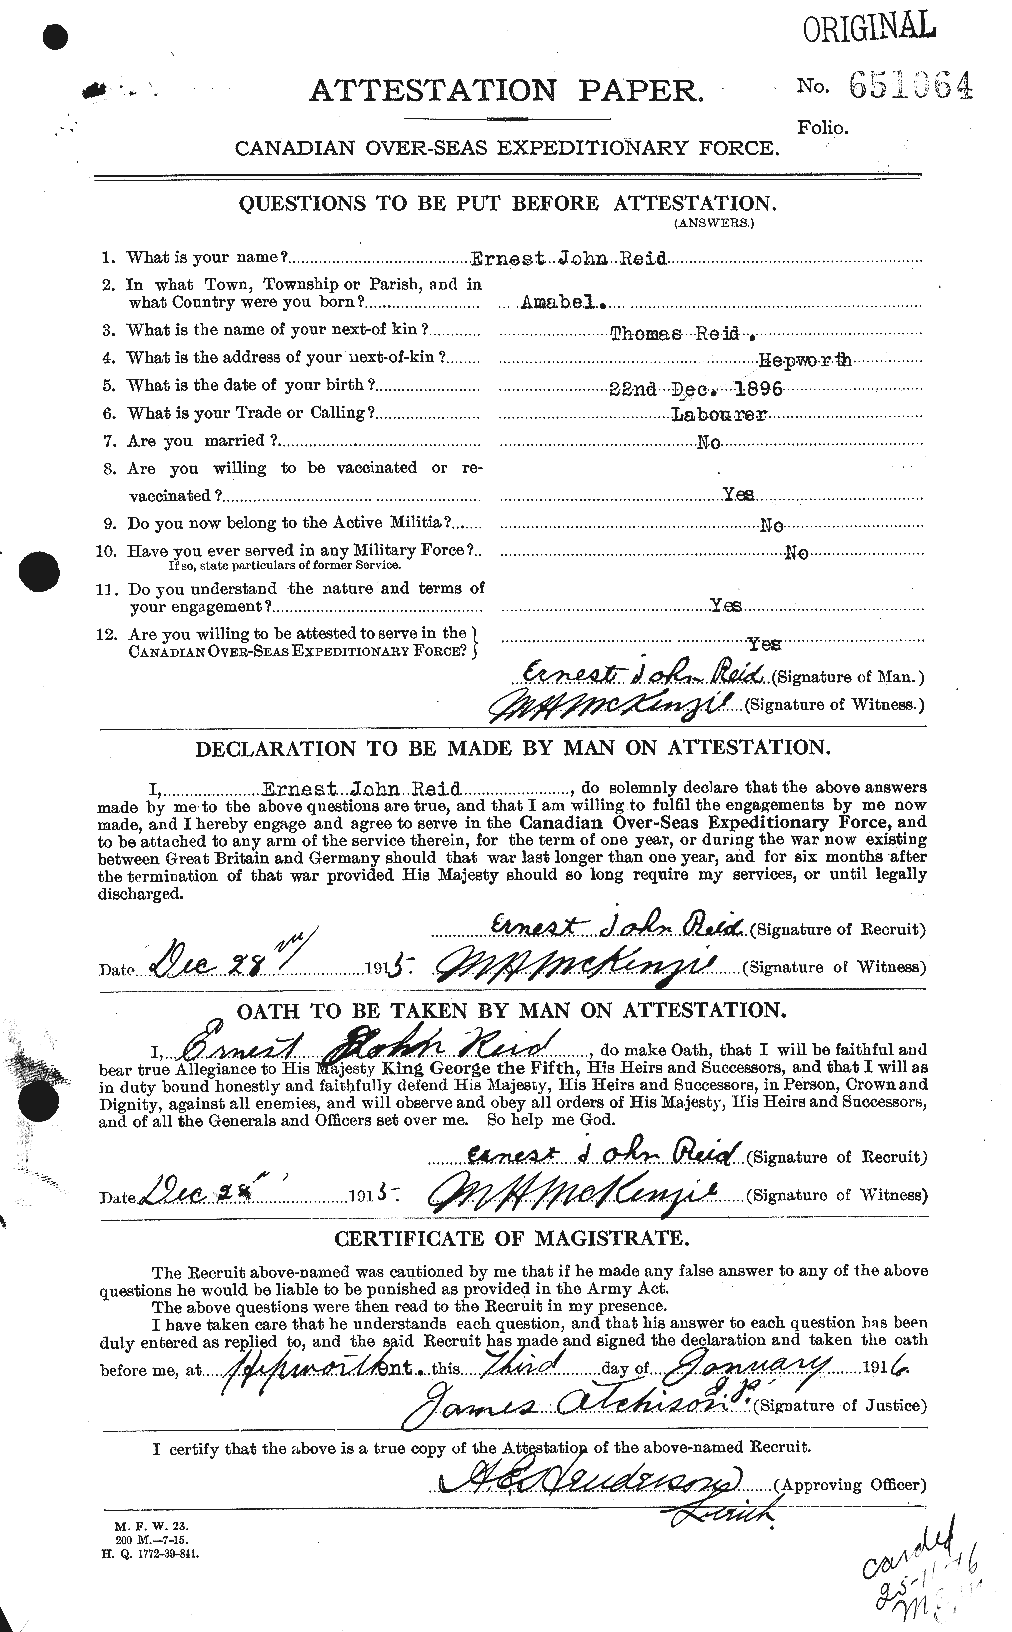 Personnel Records of the First World War - CEF 598021a